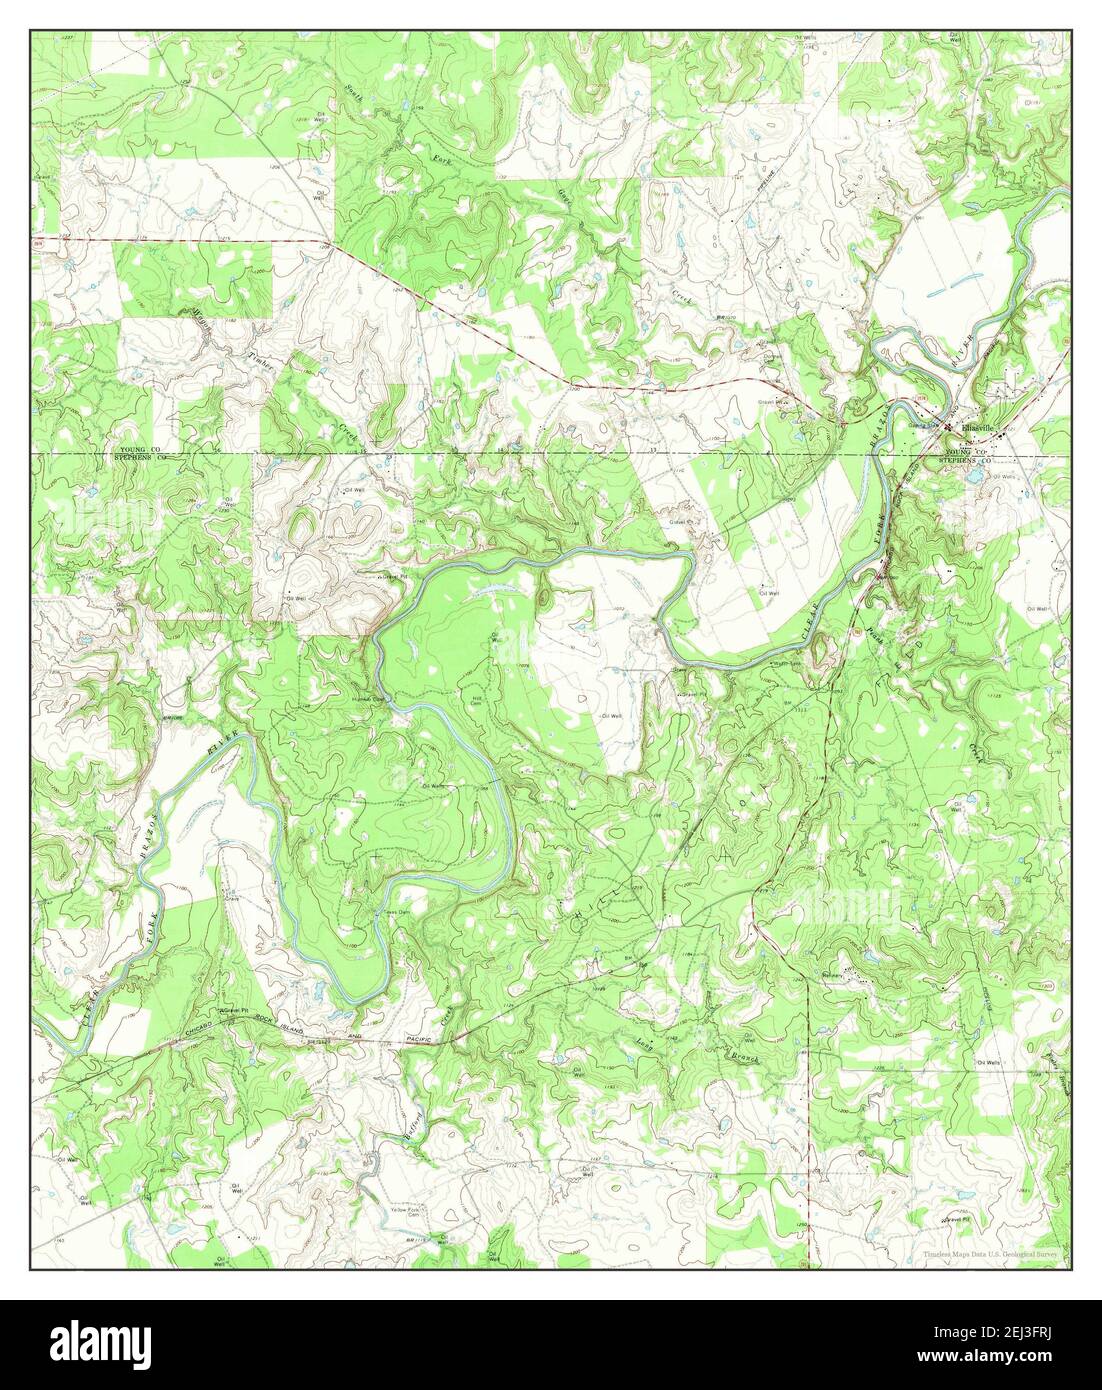 Eliasville, Texas, map 1967, 1:24000, United States of America by Timeless Maps, data U.S. Geological Survey Stock Photo